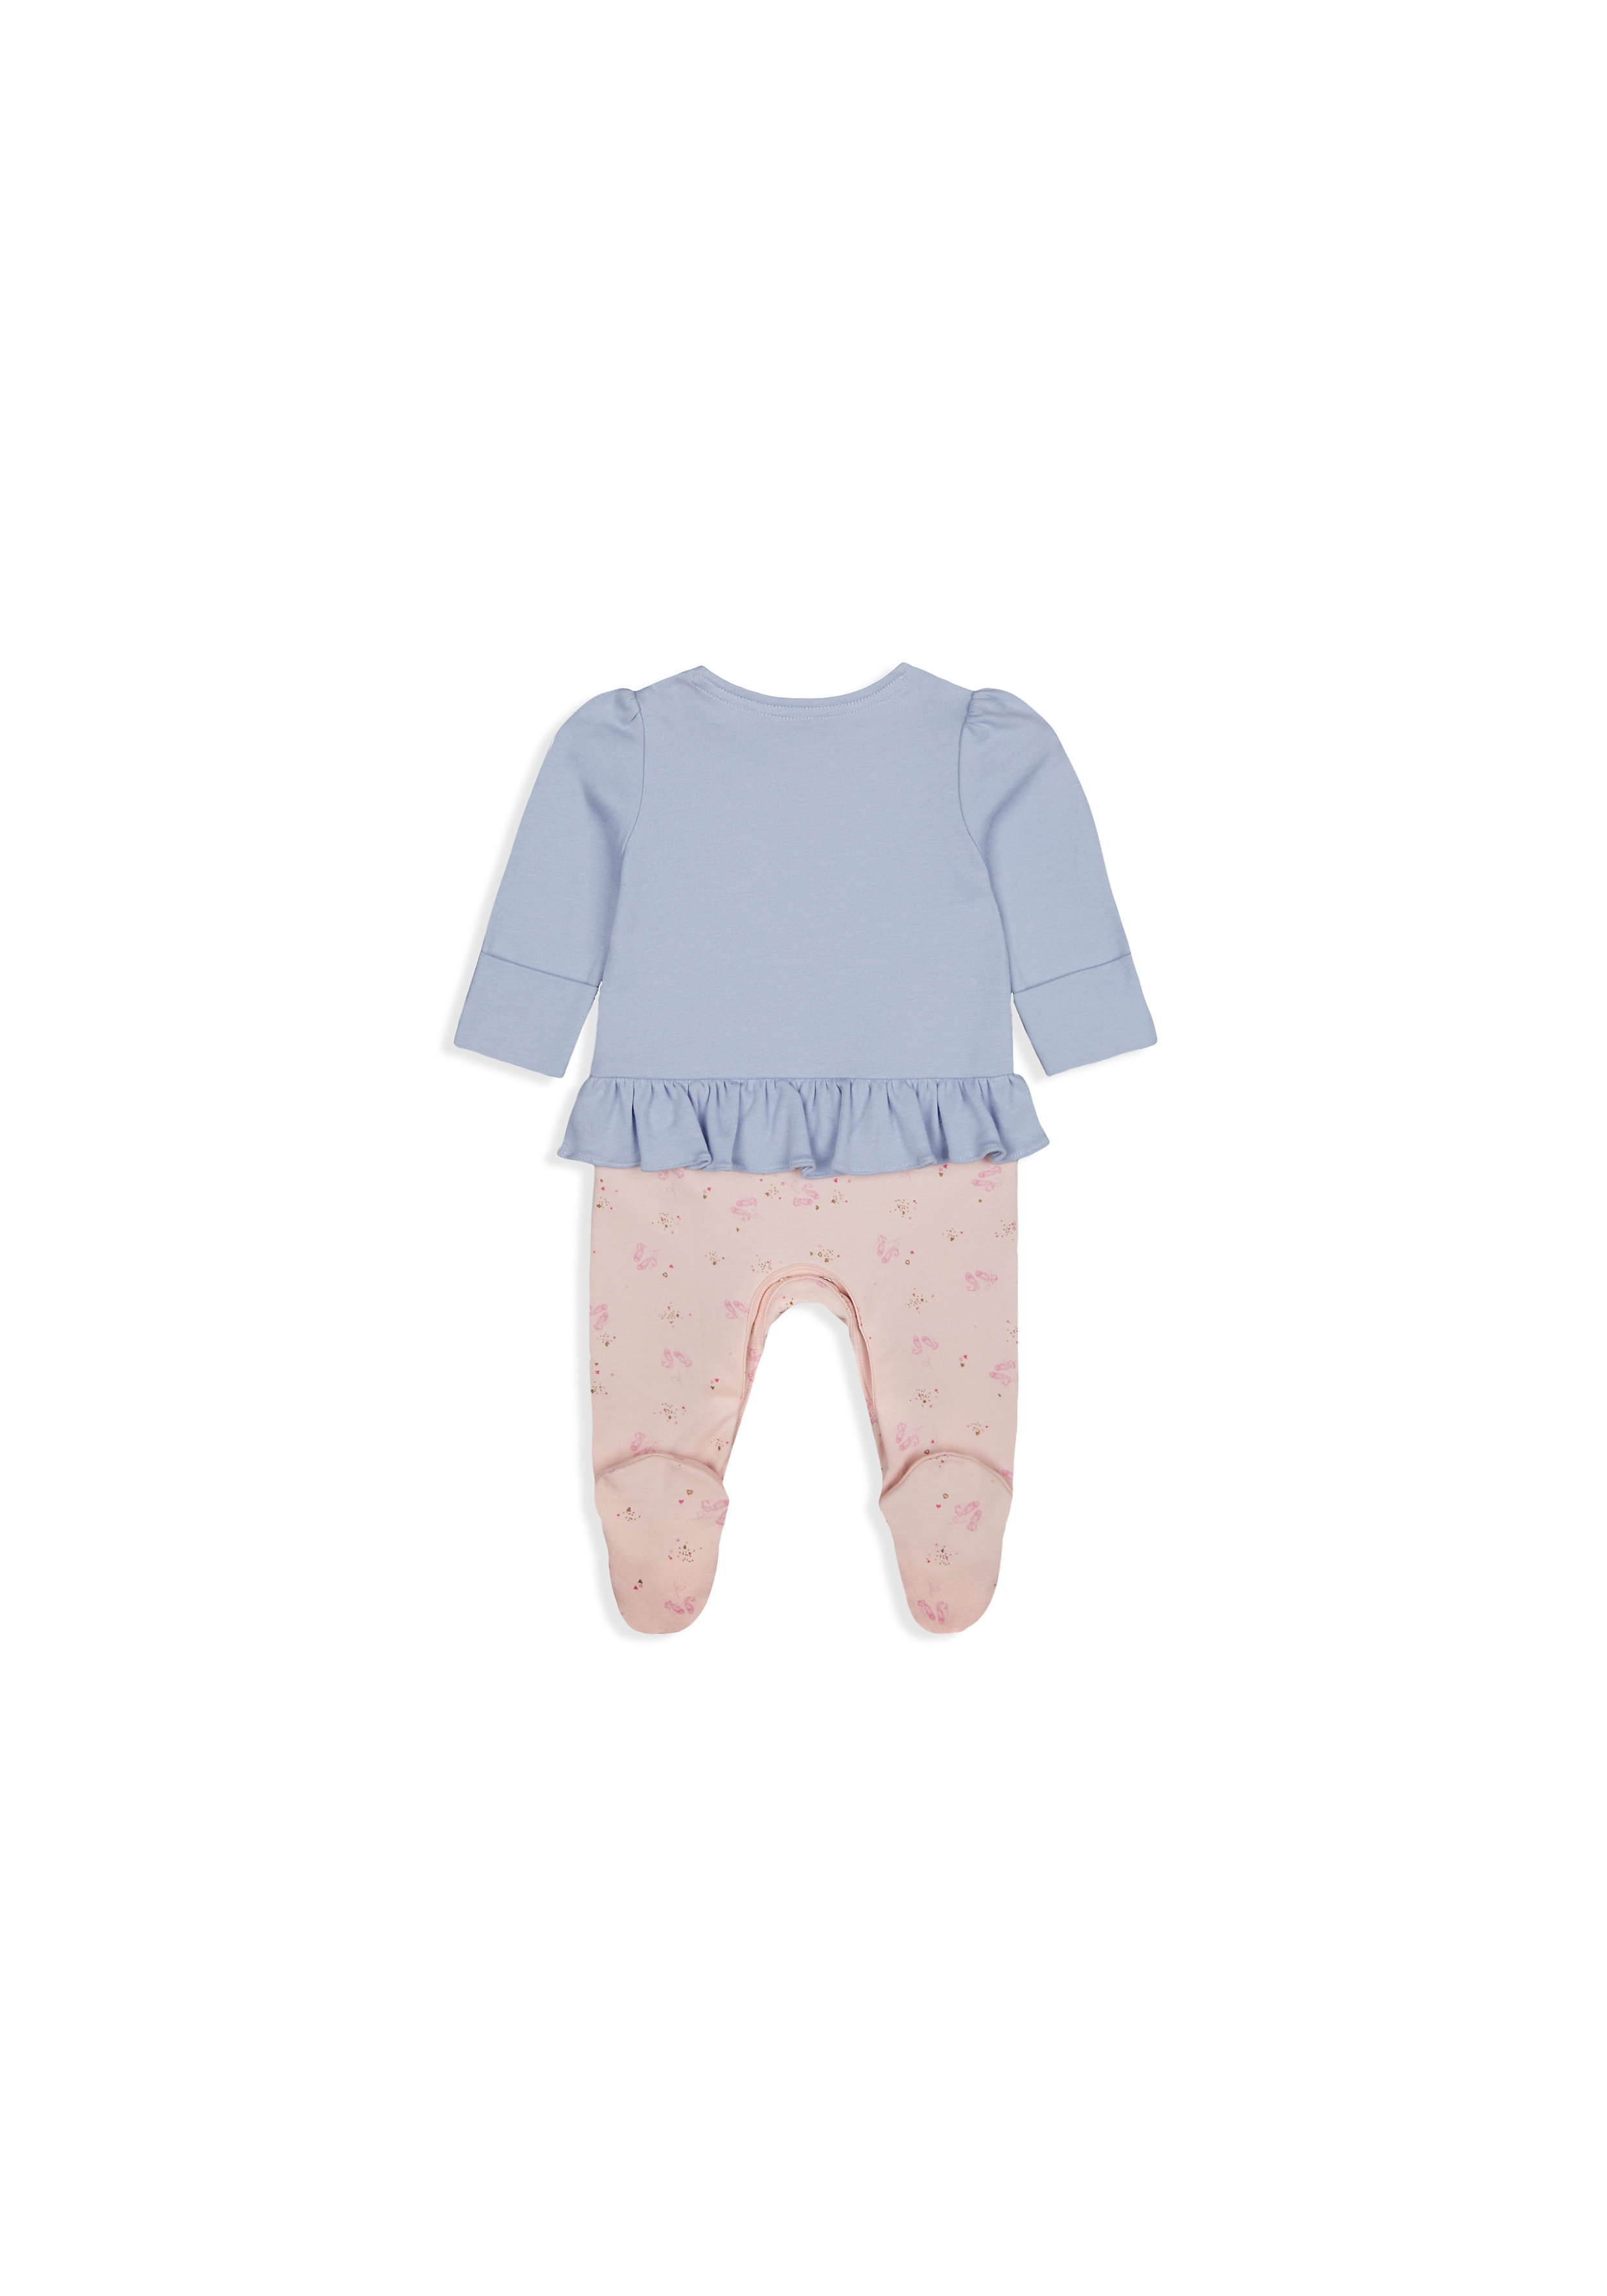 Mothercare | Girls Full Sleeves Mock Romper Ballet Shoes Embroidery - Blue 1